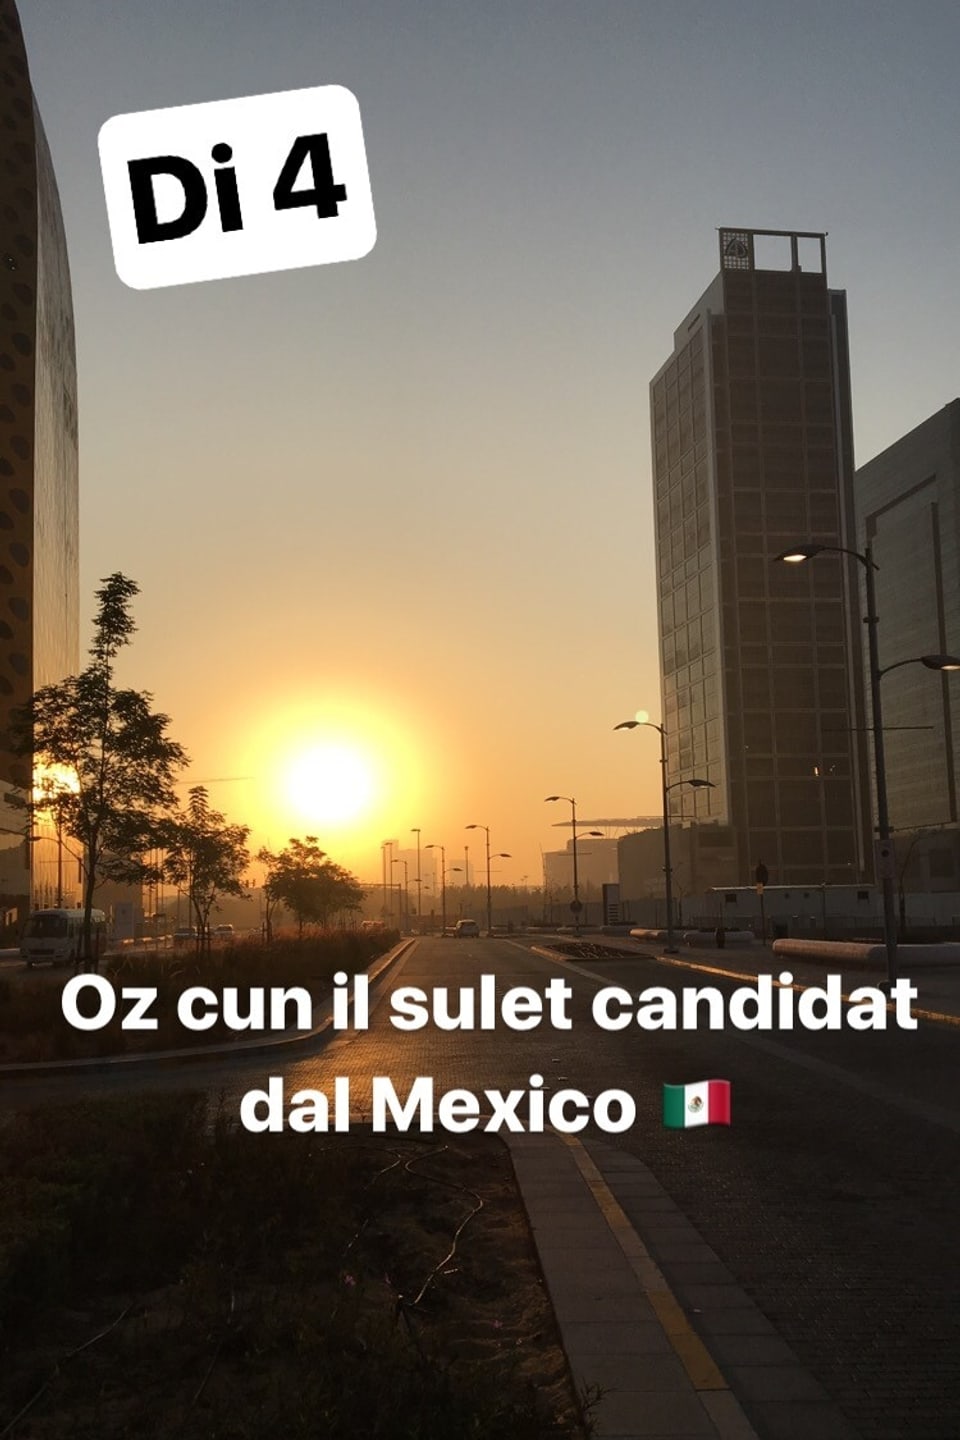 Oz discurrin nus cun il sulet candidat dal Mexico.